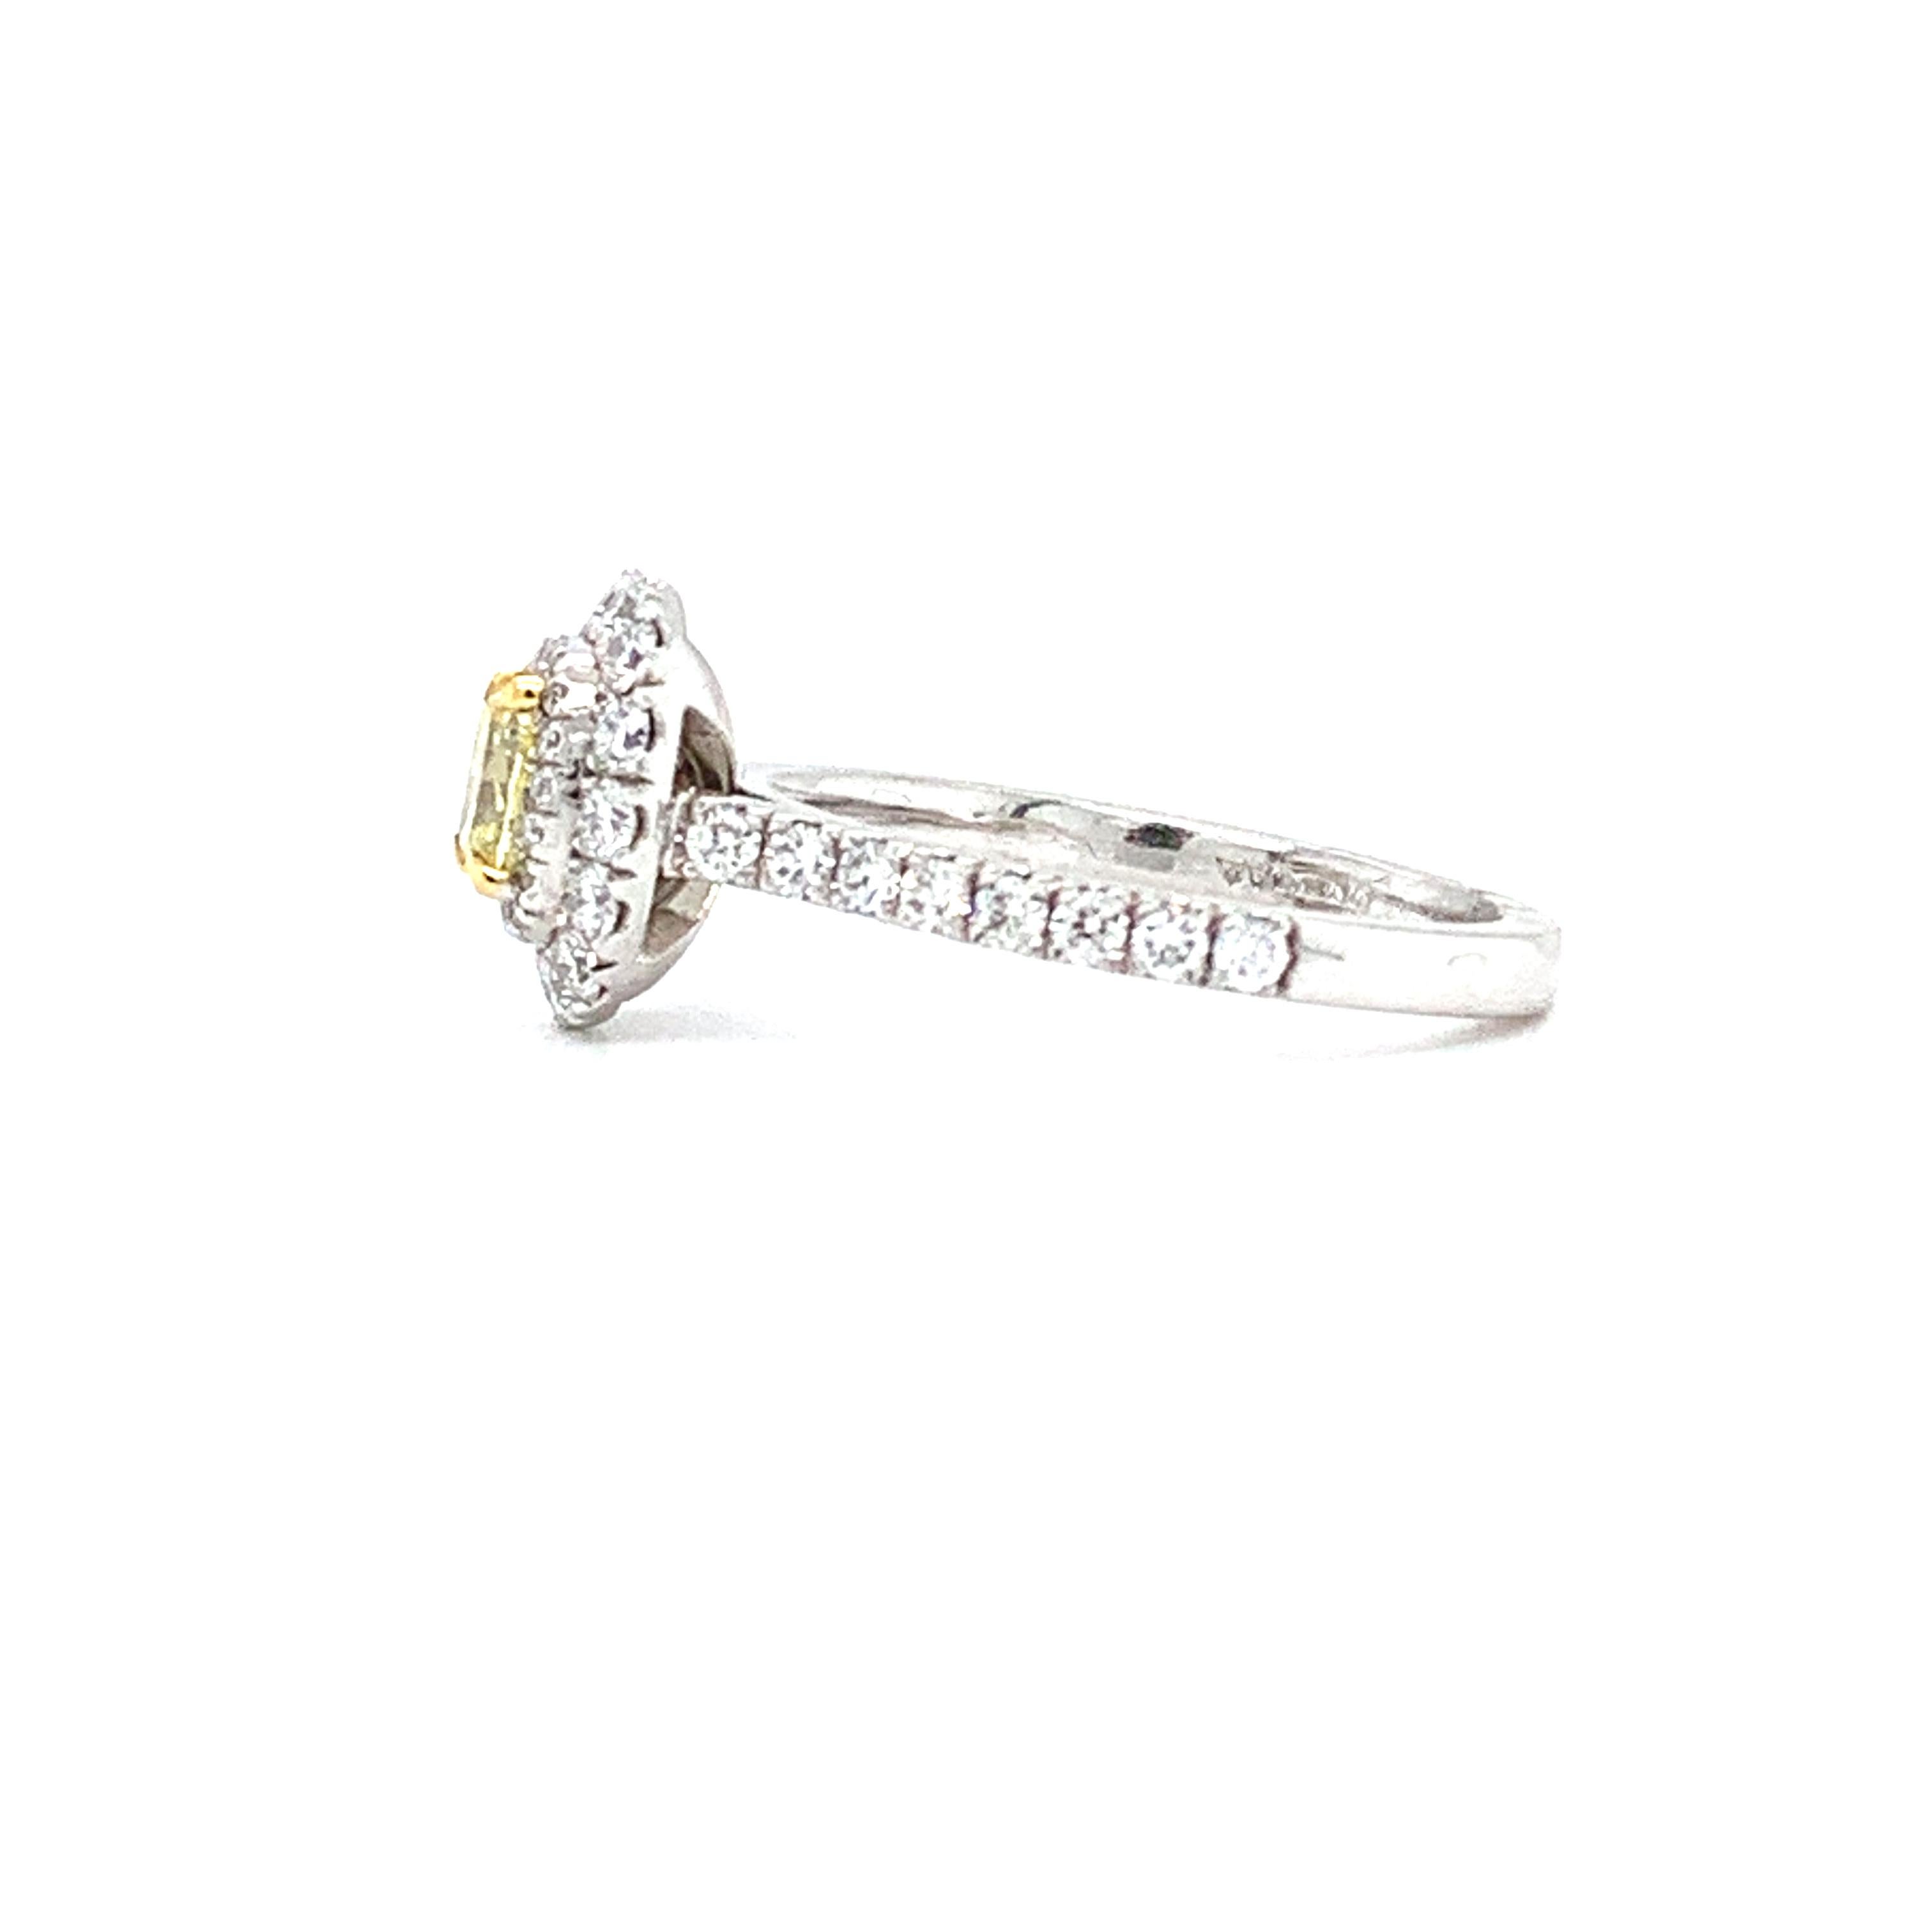 Fancy yellow diamond double halo engagement ring 18ct white gold In New Condition For Sale In London, GB